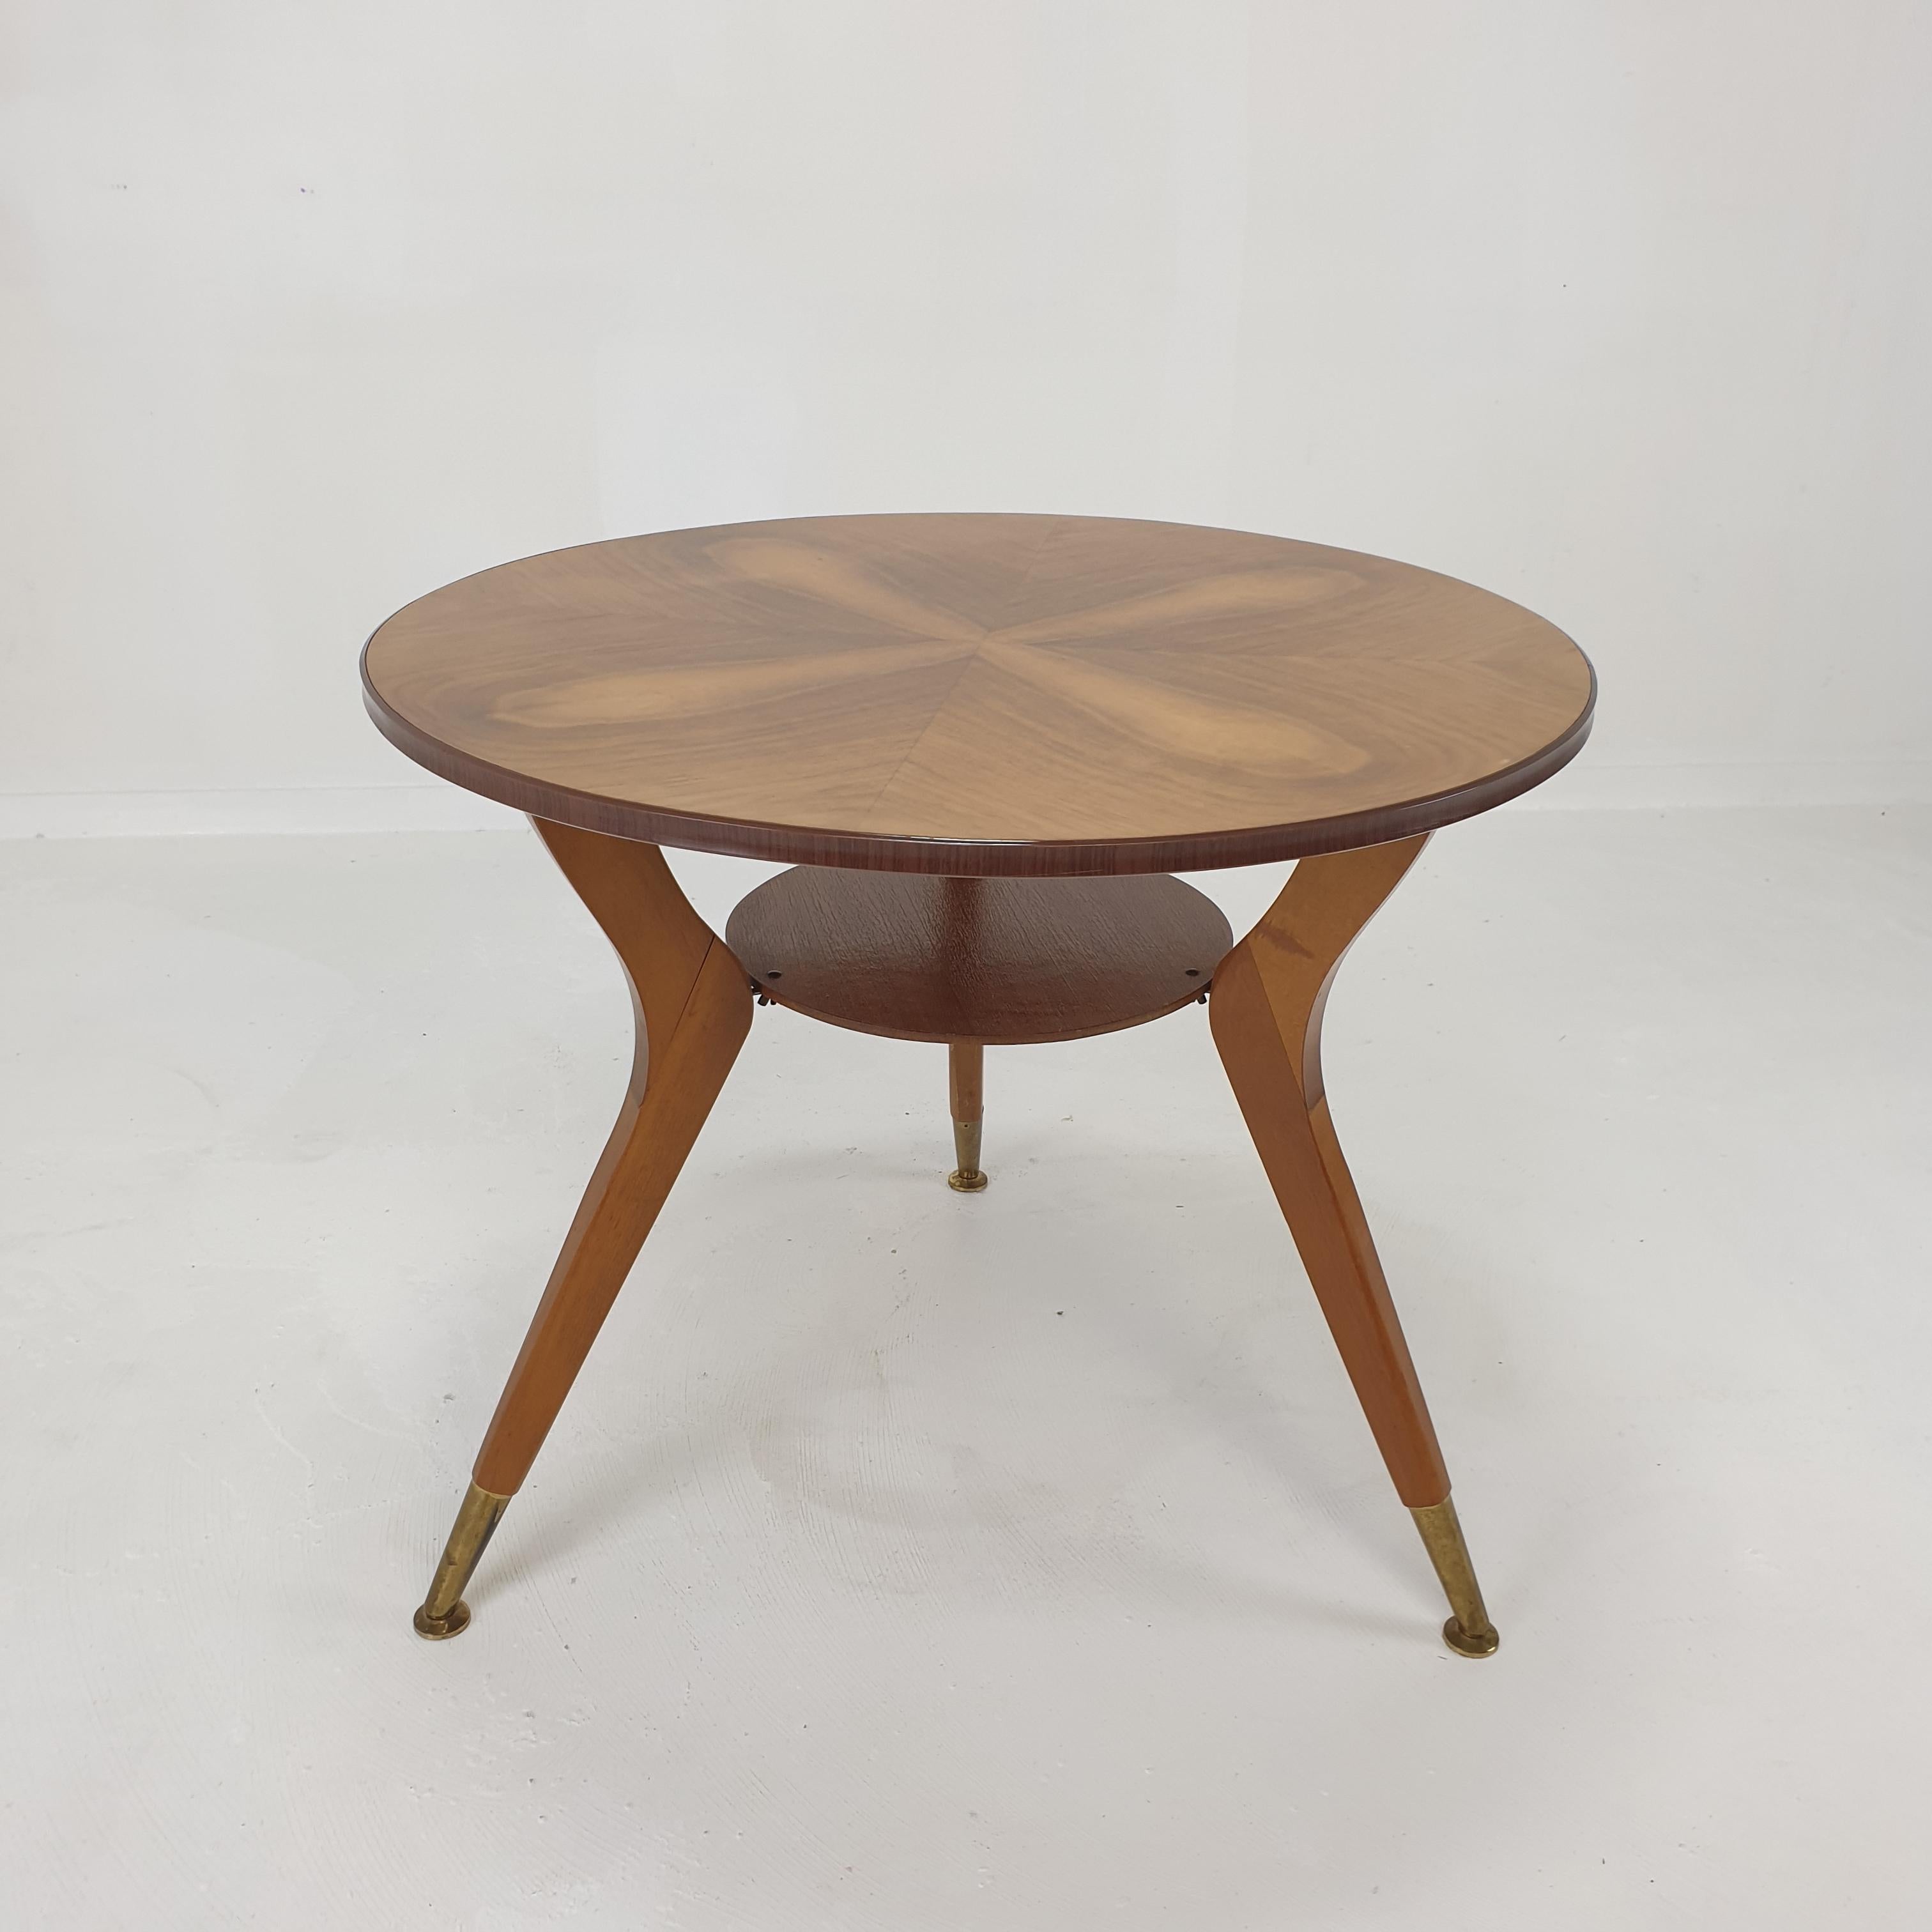 Midcentury Italian Wooden Coffee or Side Table with Brass Feet, 1960s For Sale 6